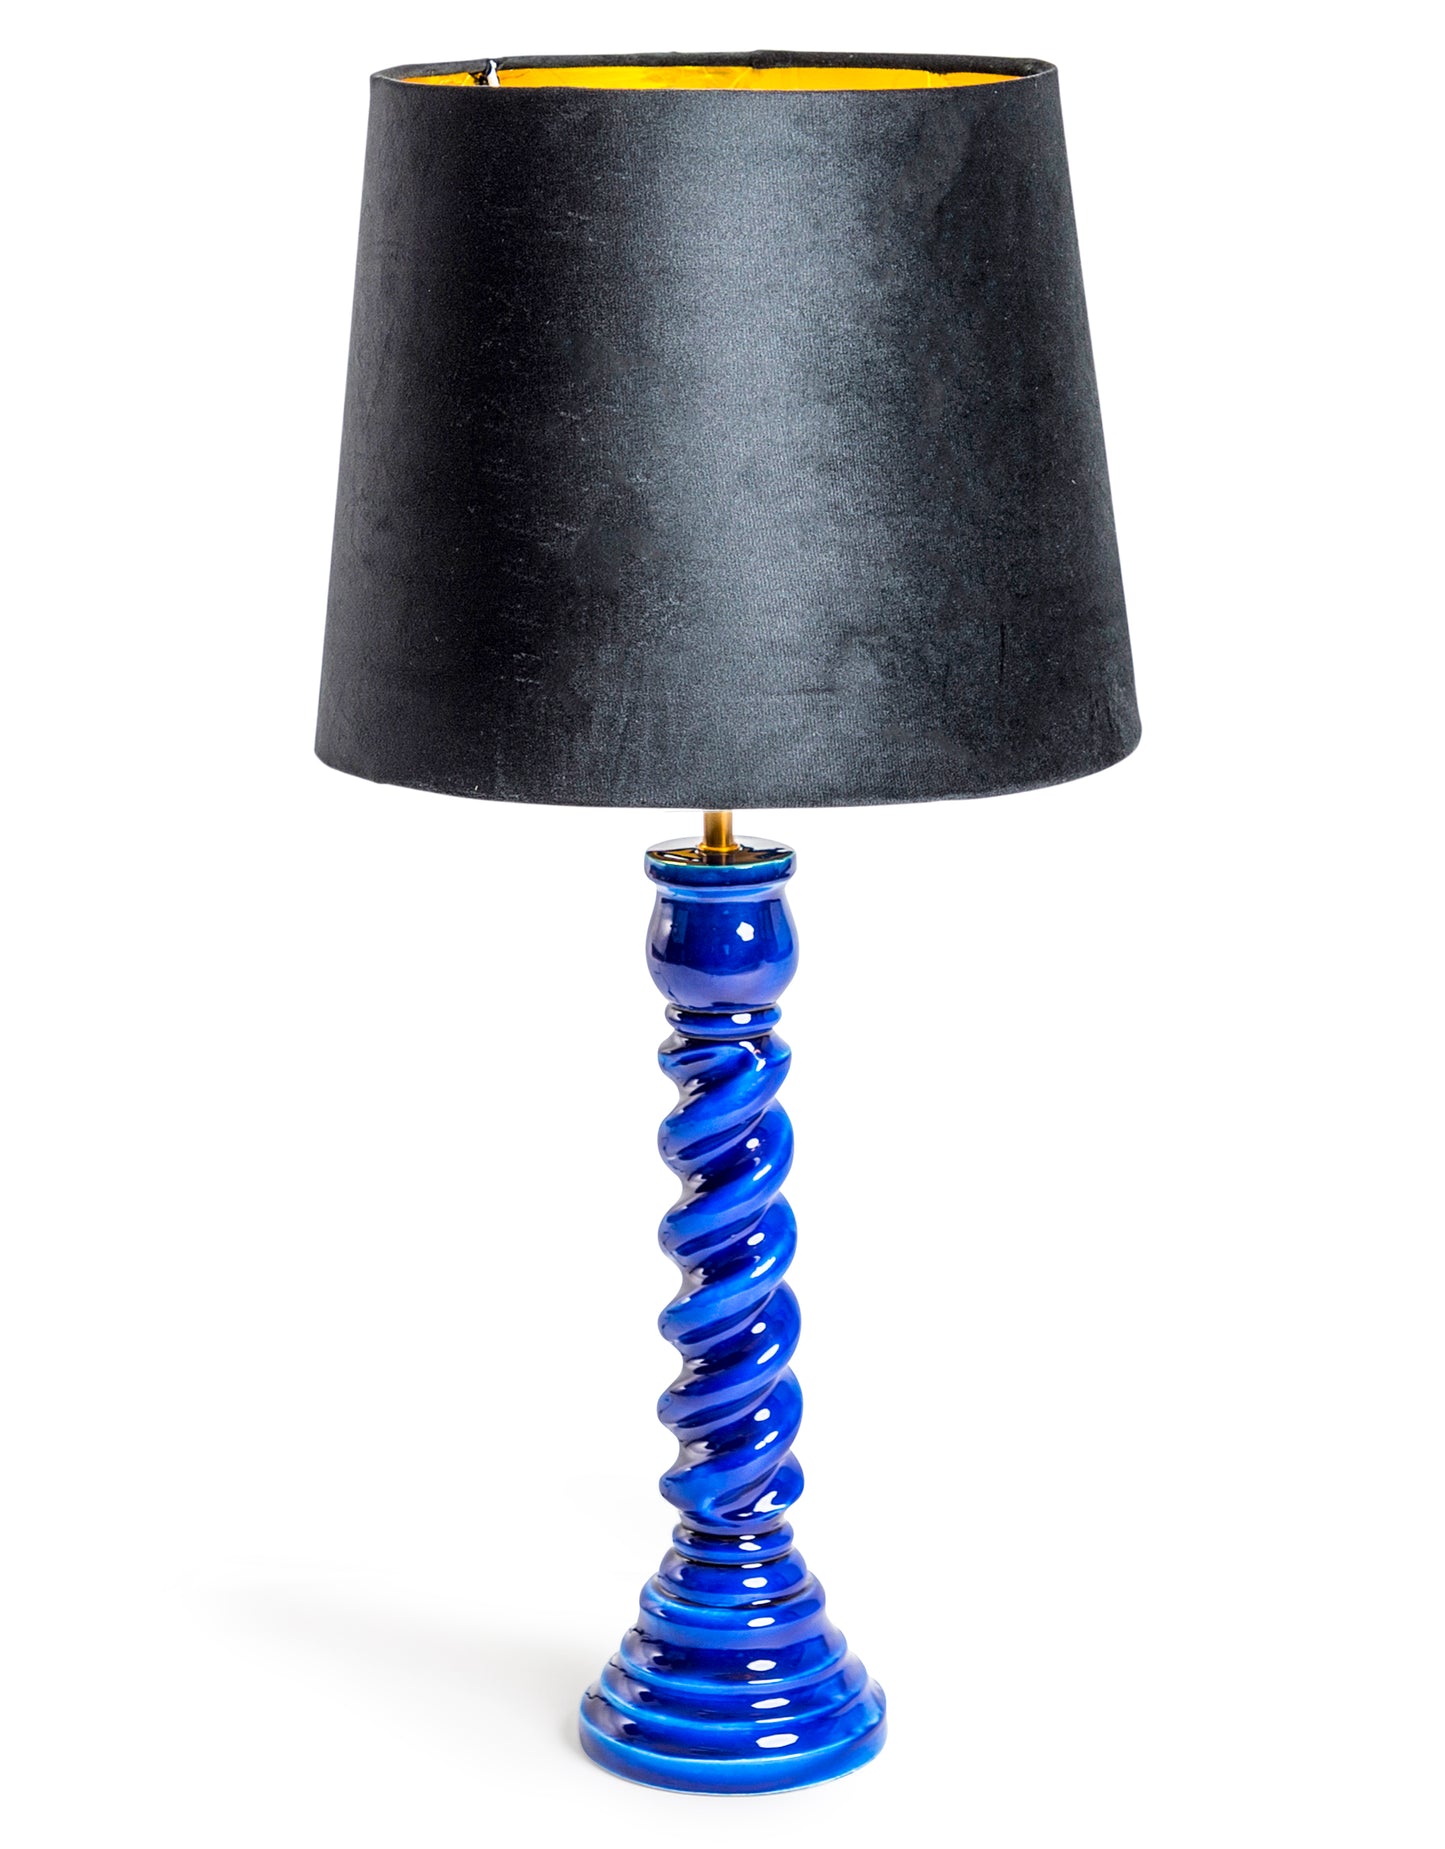 Sapphire Blue Gloss Table Lamp with Metallic-Lined Velvet Shade